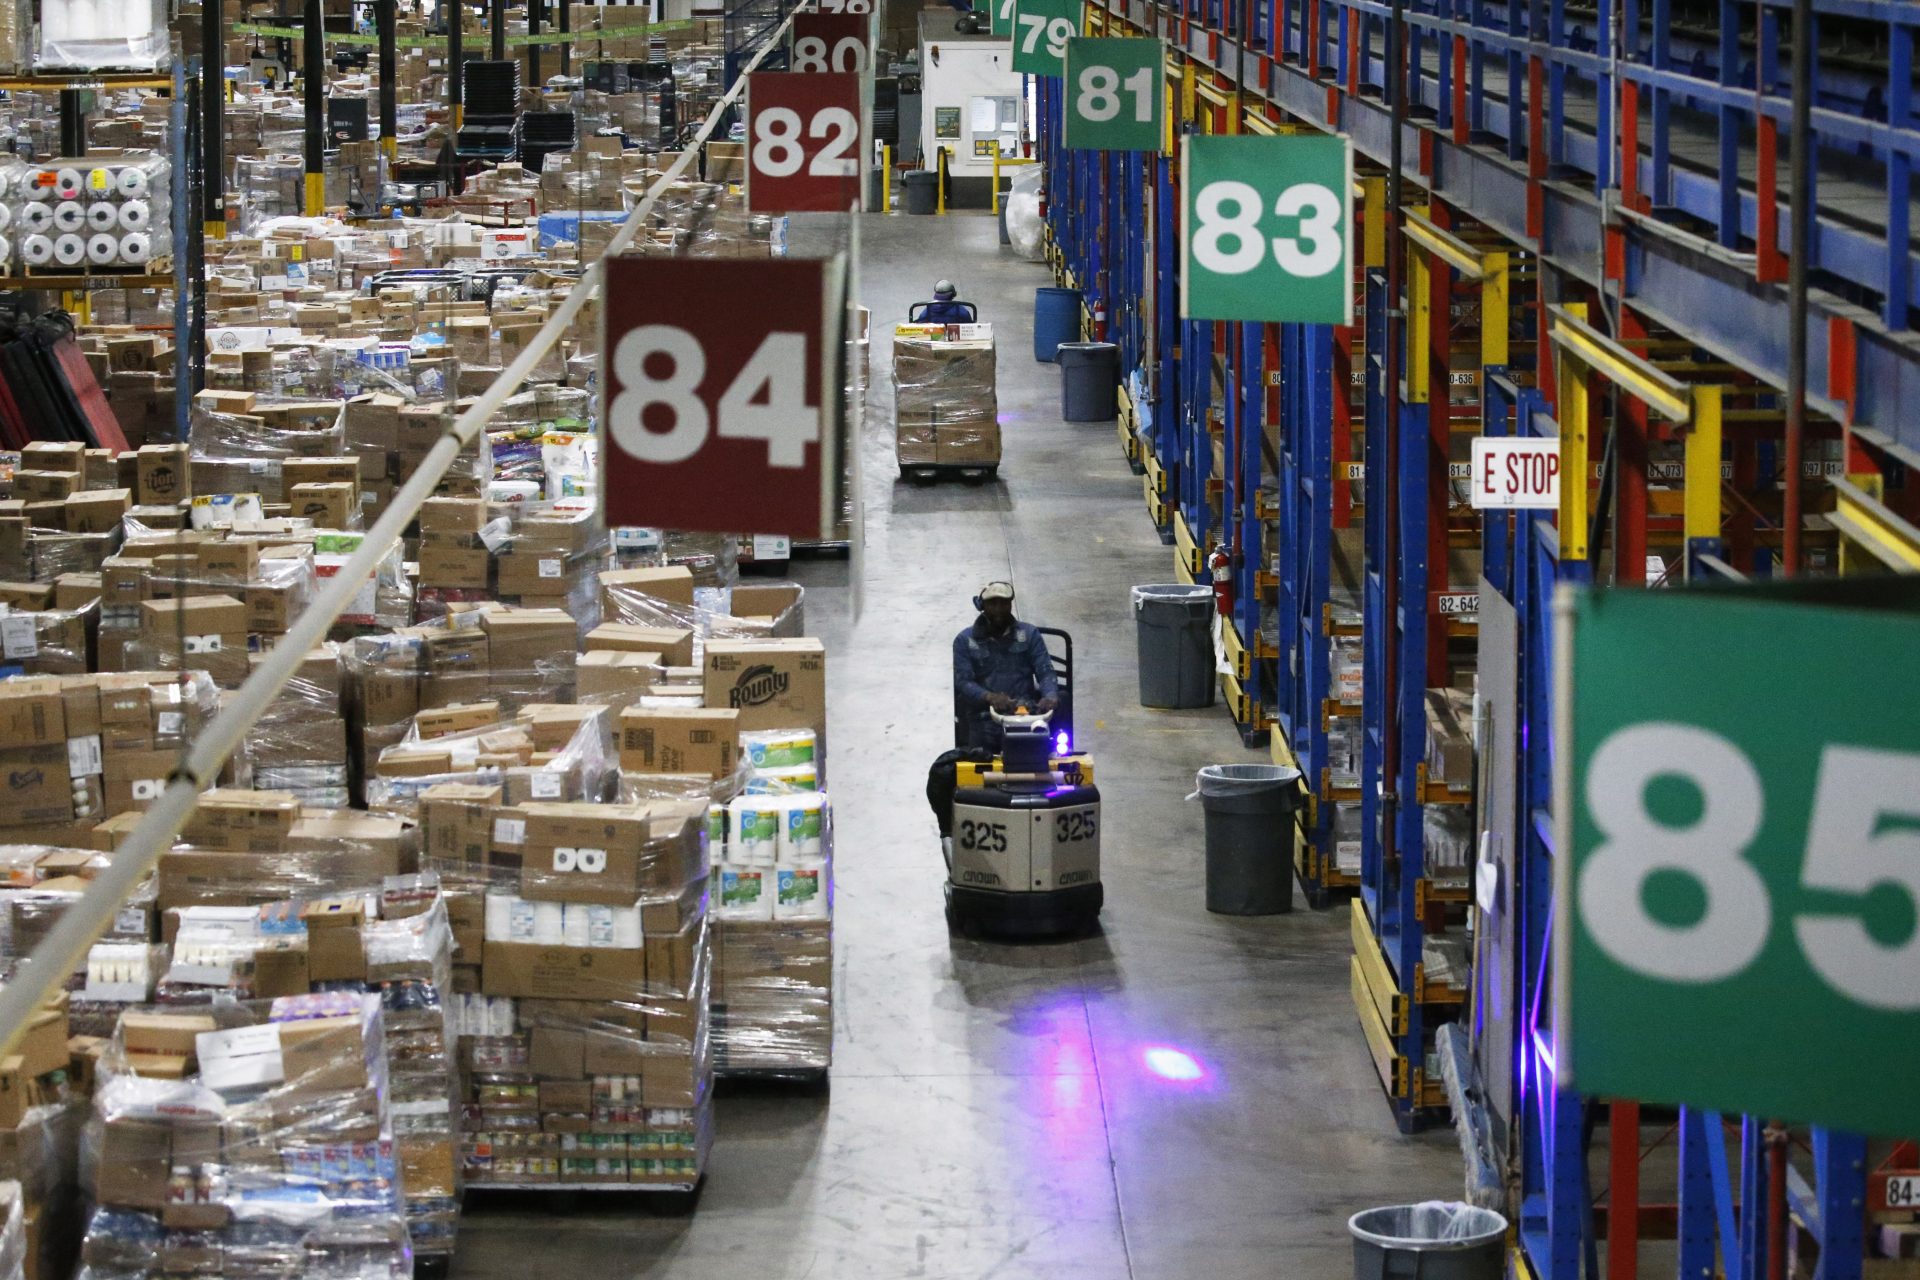 Employees work at the Associated Foods Stores distribution warehouse, Friday, March 20, 2020, in Farr West, Utah. Associated Foods Stores supplies grocery retailers in Oregon, Idaho, Montana, Wyoming, Utah, Colorado and Nevada.